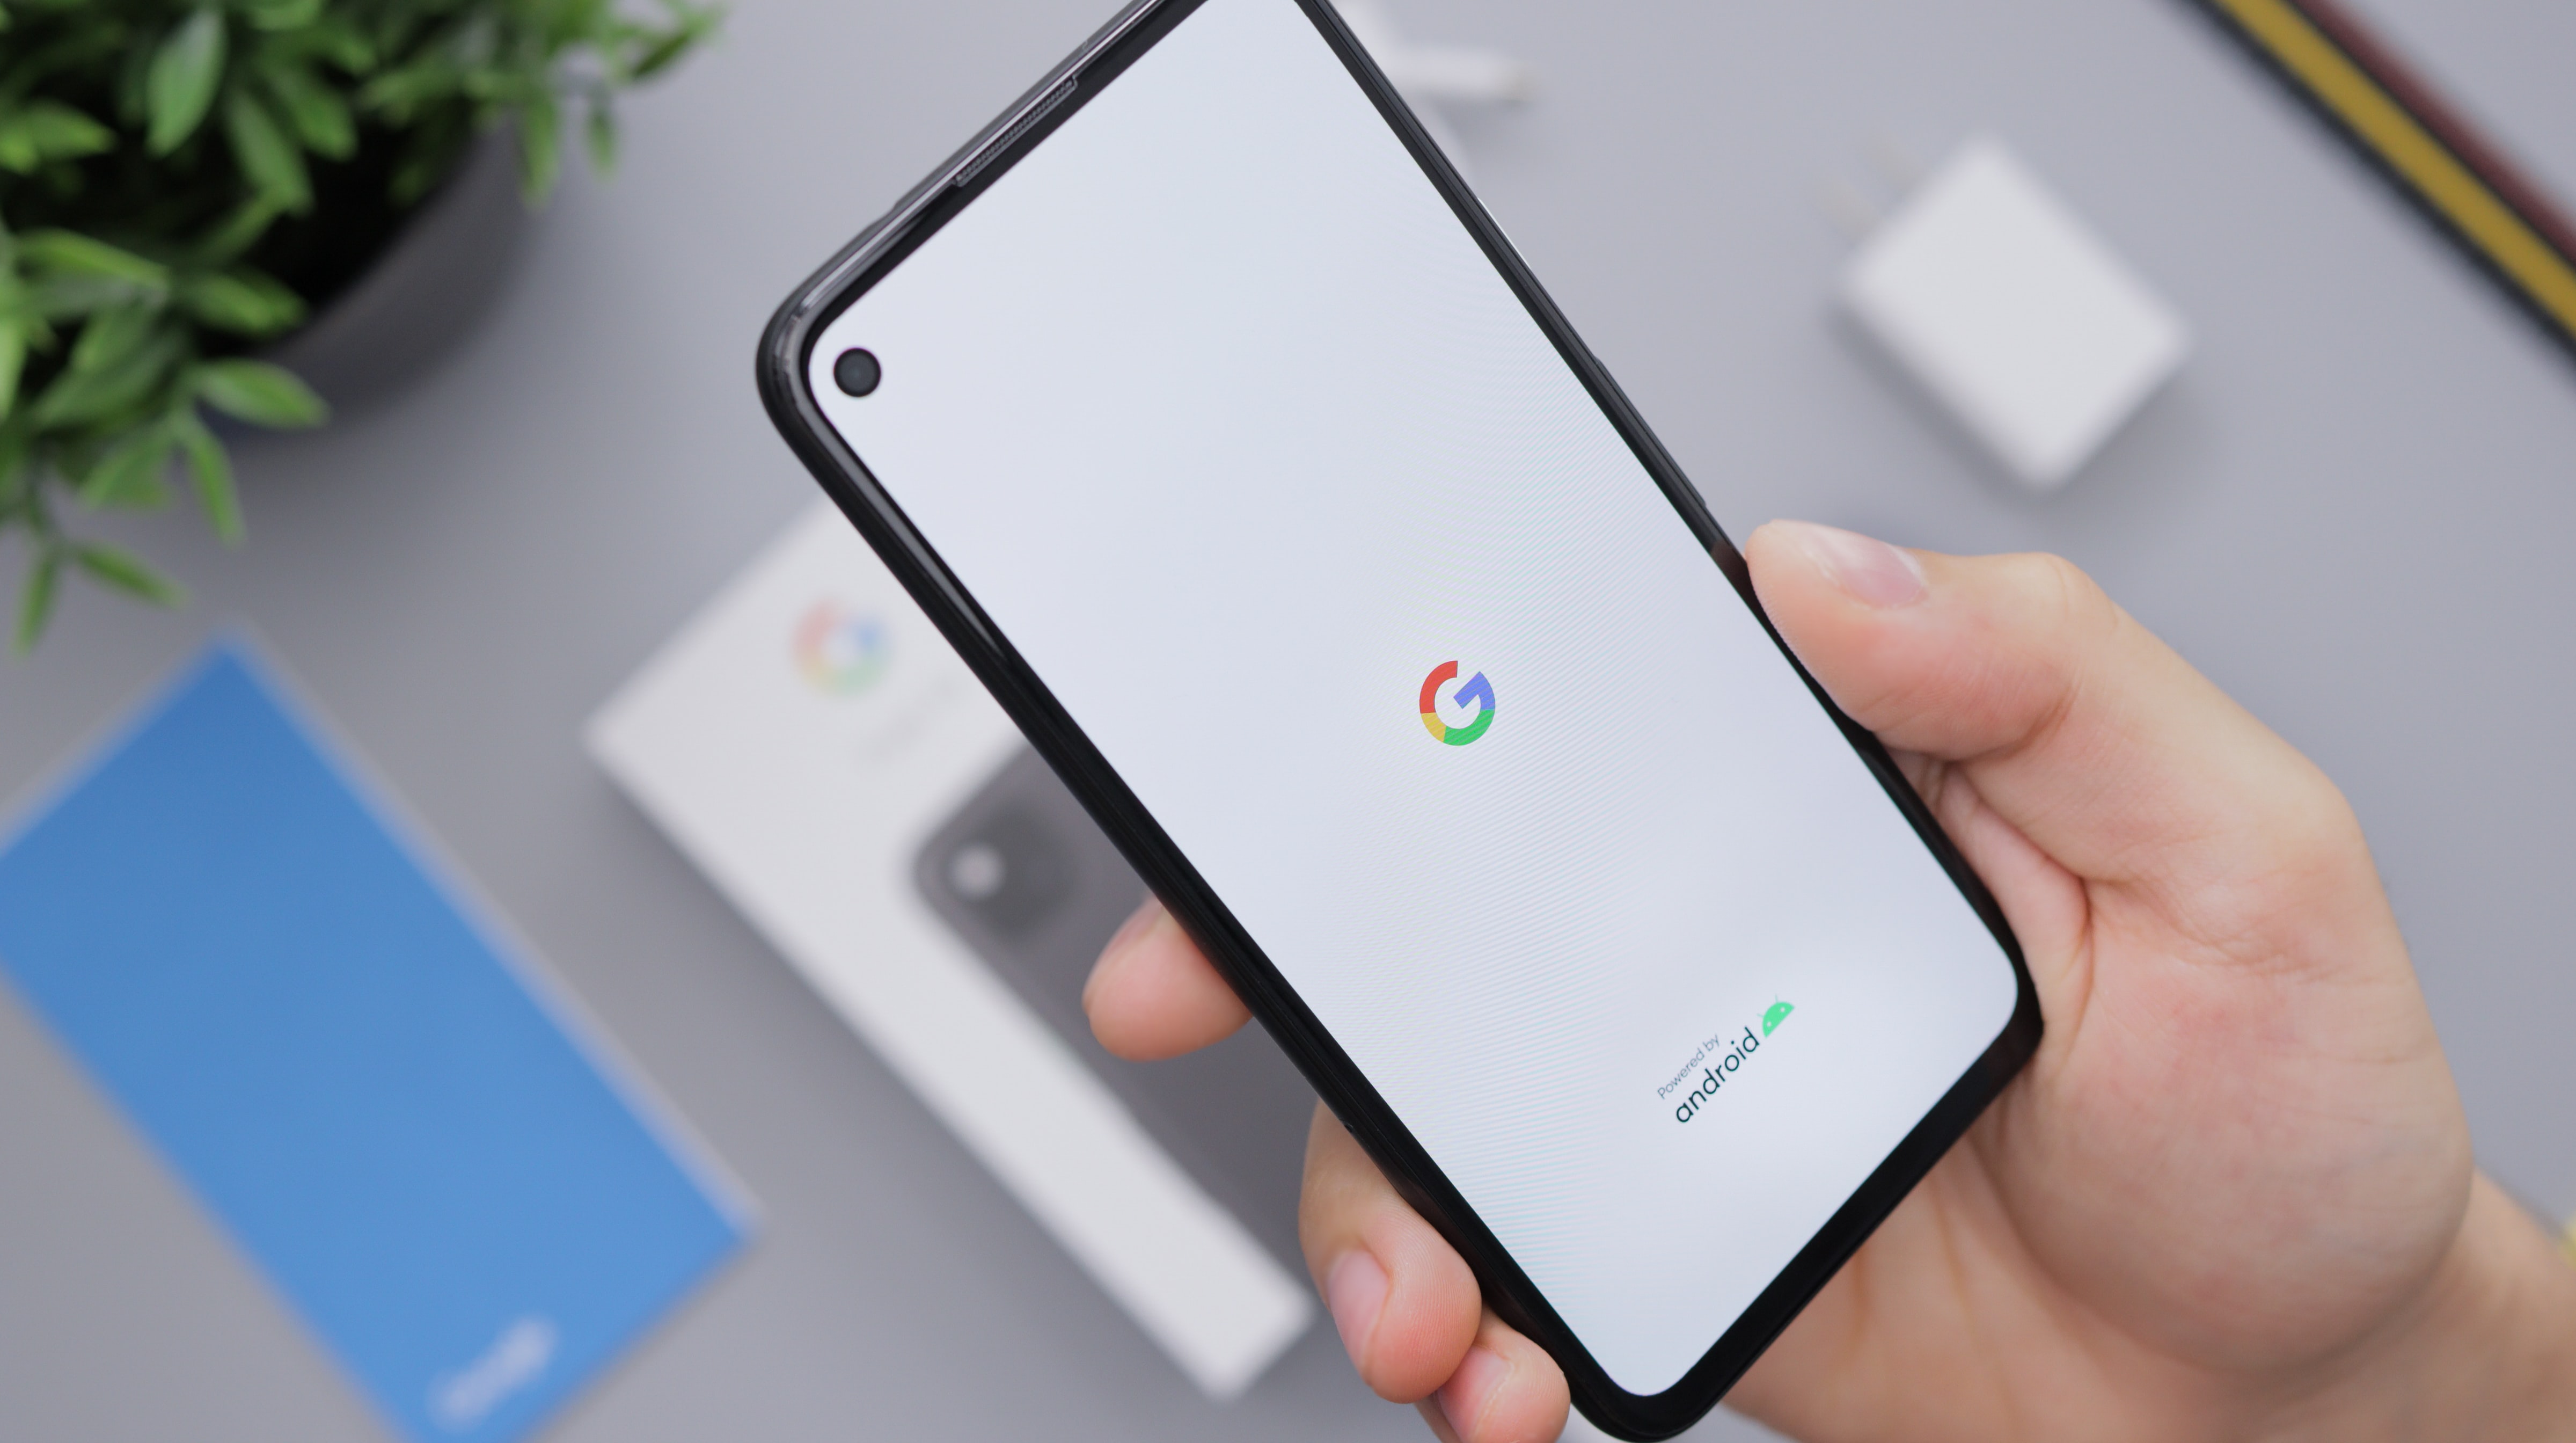 Google Android Pixel 4a Smartphone Booting Up